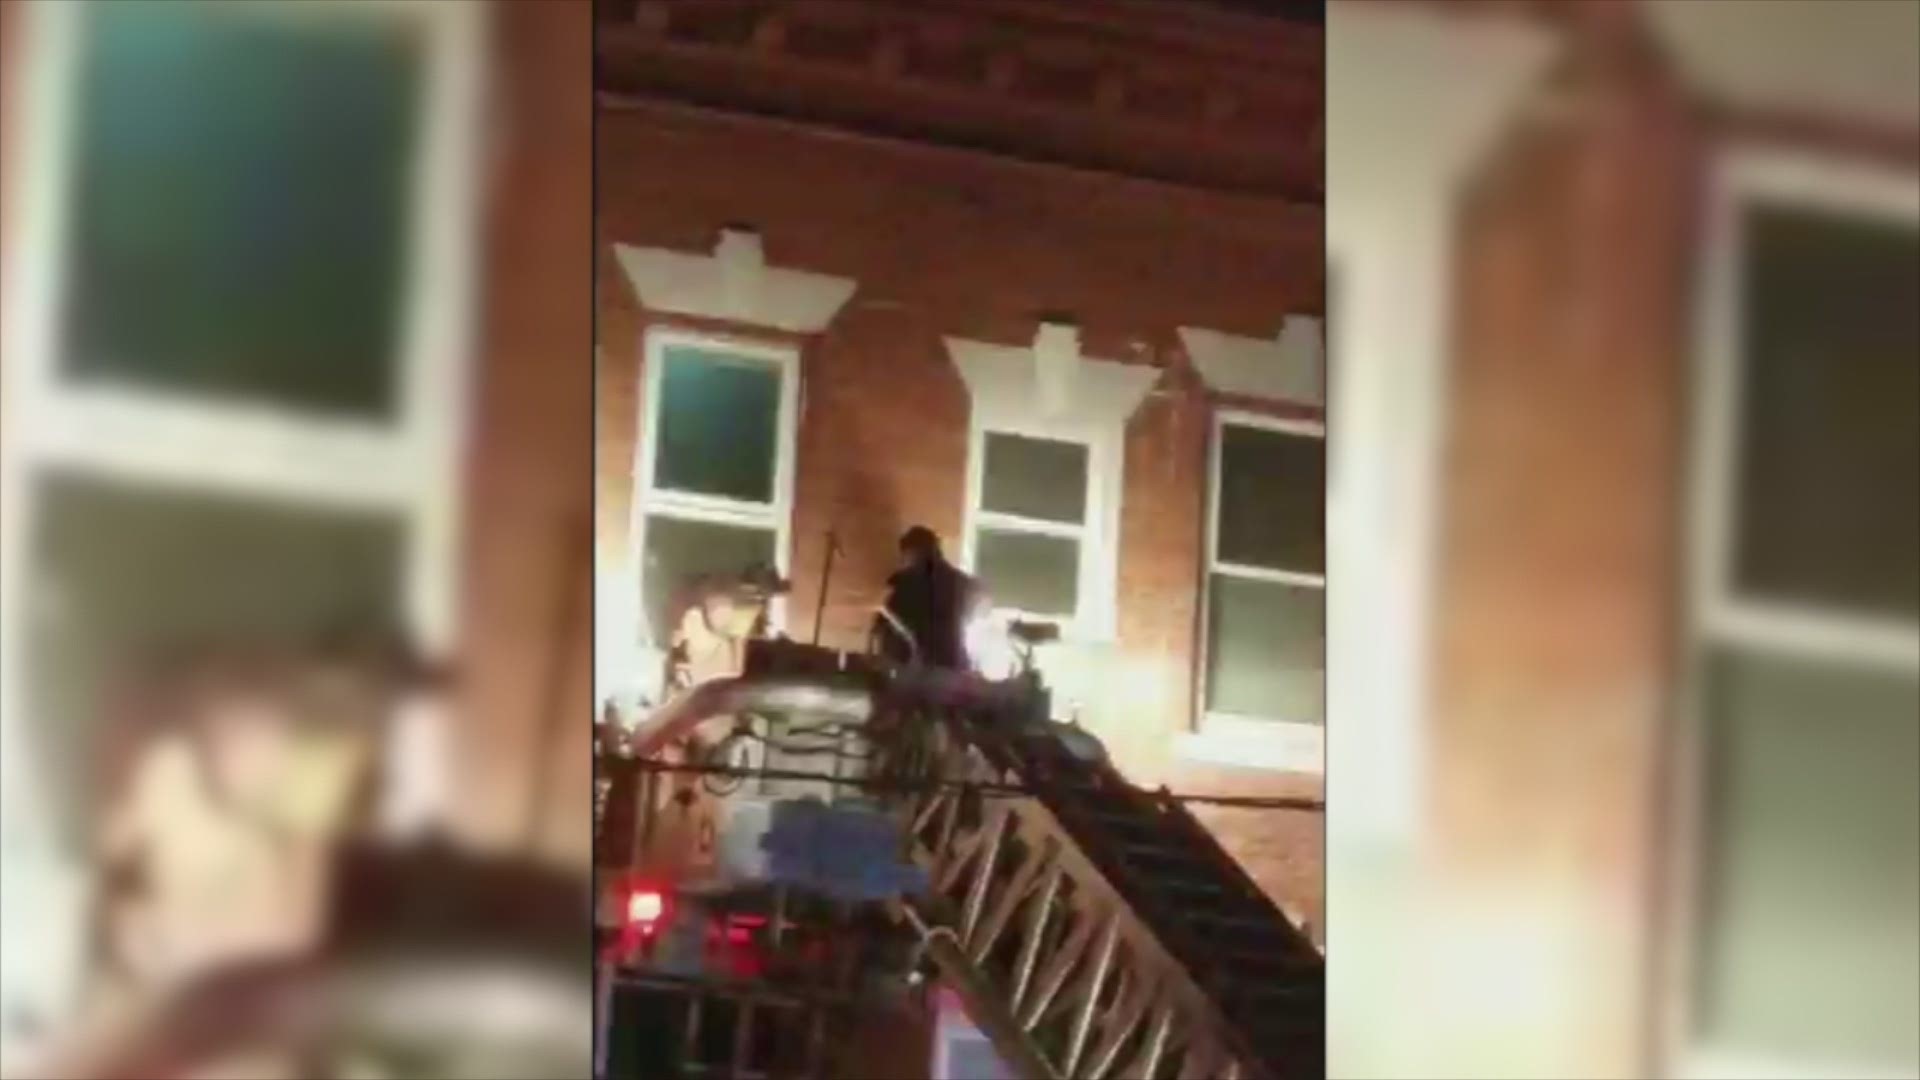 Firefighters were seen using a ladder truck to rescue a person from the third floor of the Bond Street apartment building.